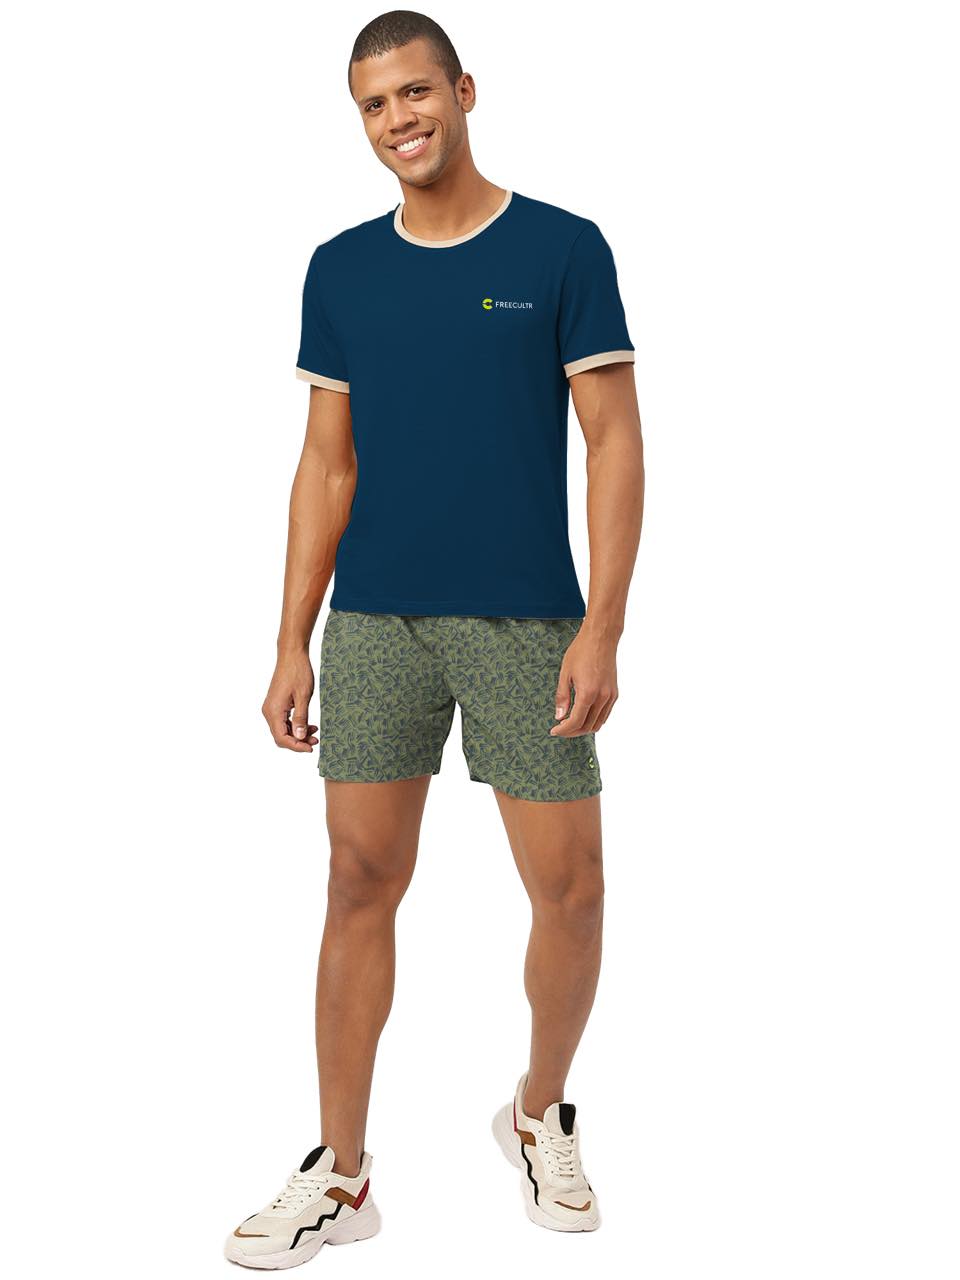 All-Day Printed Boxer Shorts - (Pack of 1)